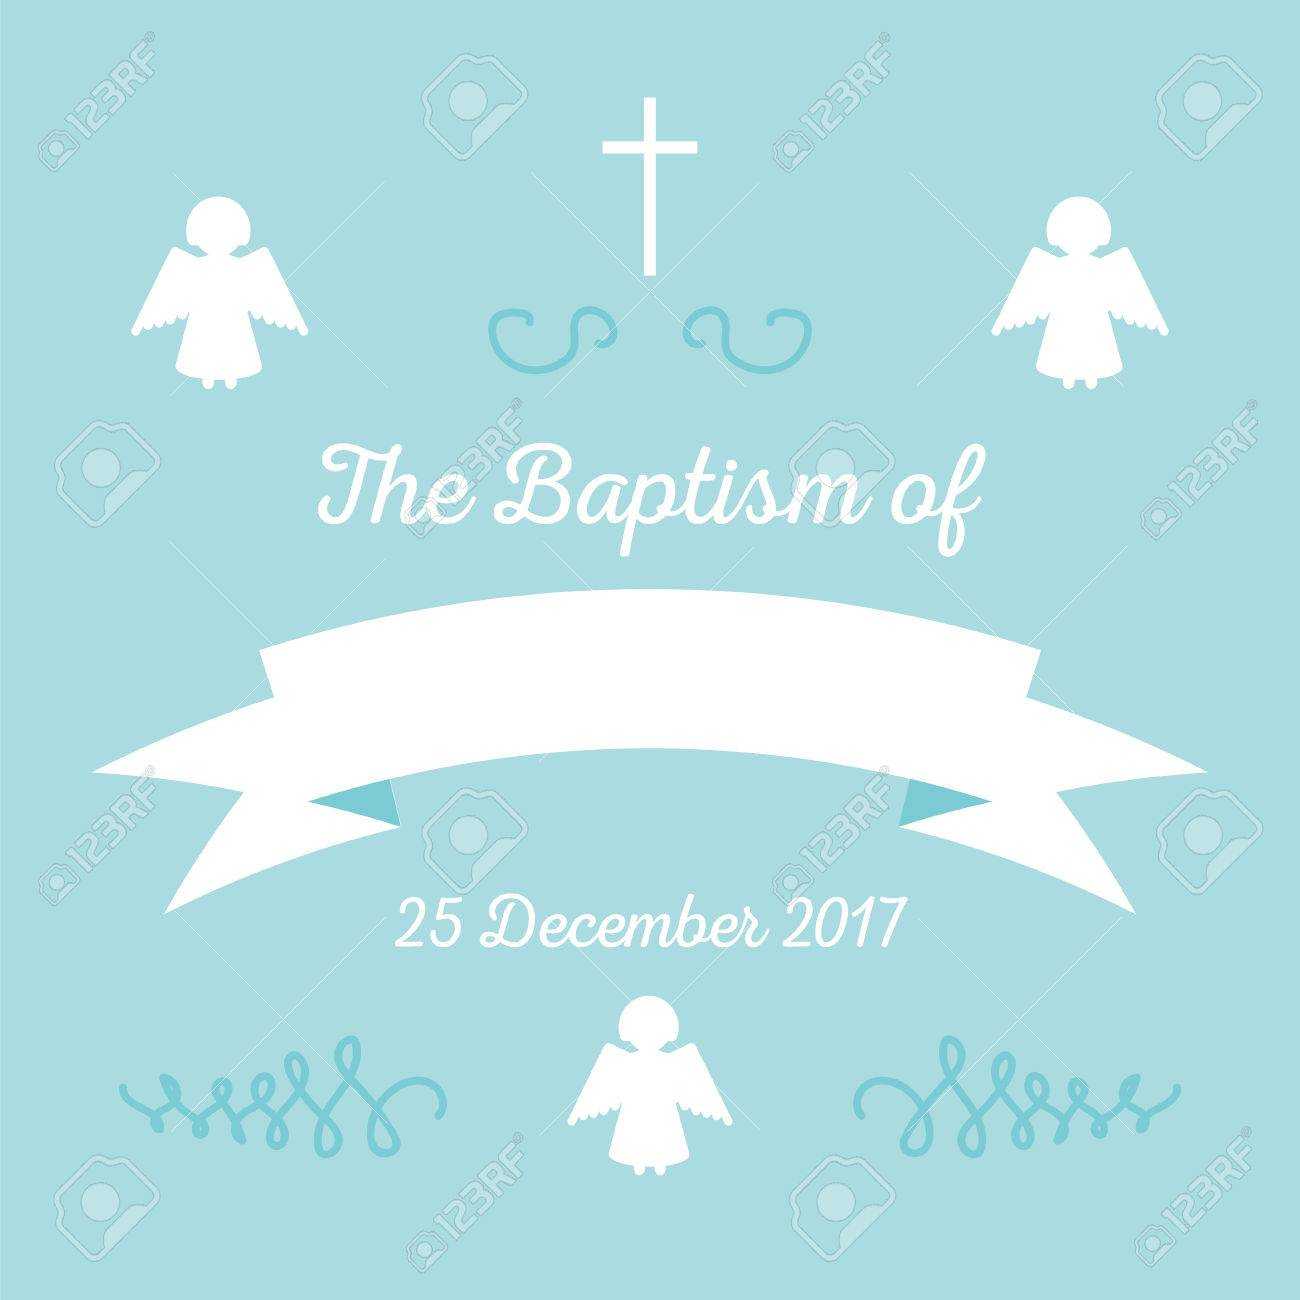 Baptism Invitation Card Template. Stock Vector Illustration For.. With Christening Banner Template Free